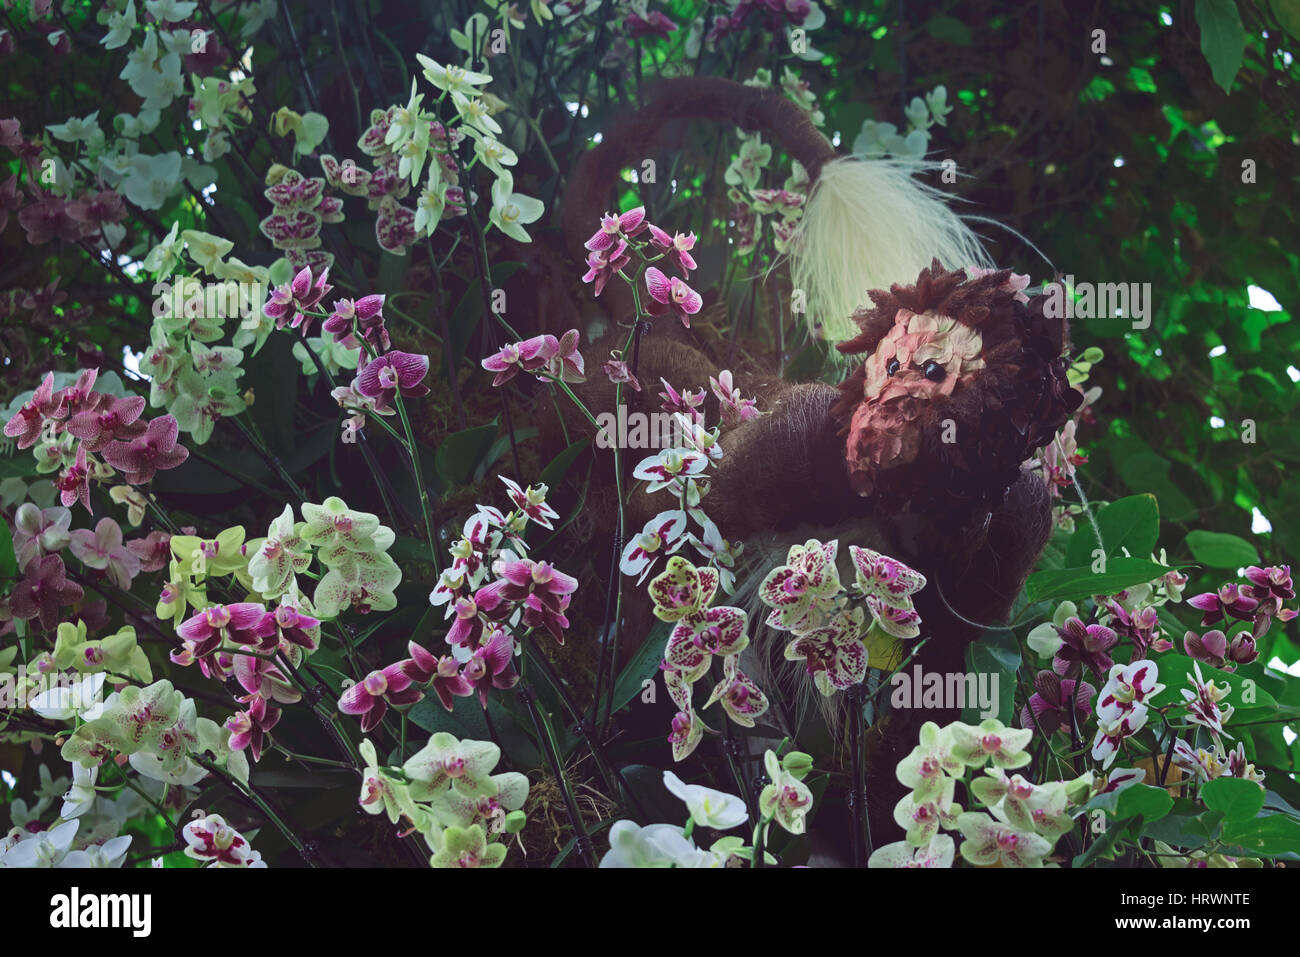 Monkey Floral art at Festival of Orchids in Kew Gardens, London Stock Photo